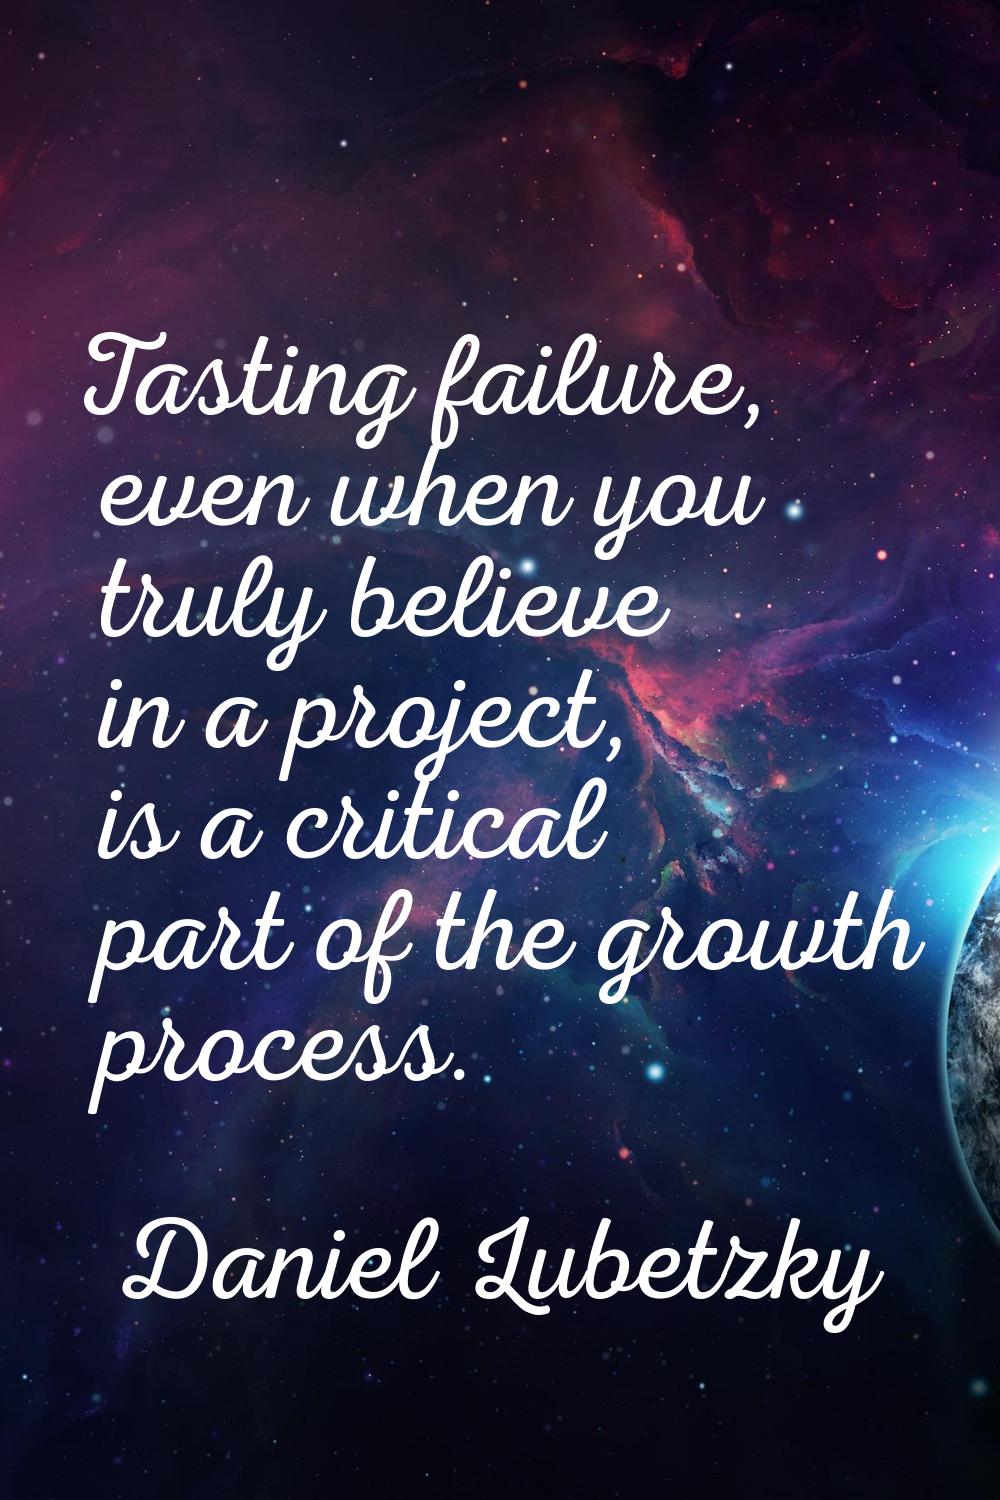 Tasting failure, even when you truly believe in a project, is a critical part of the growth process